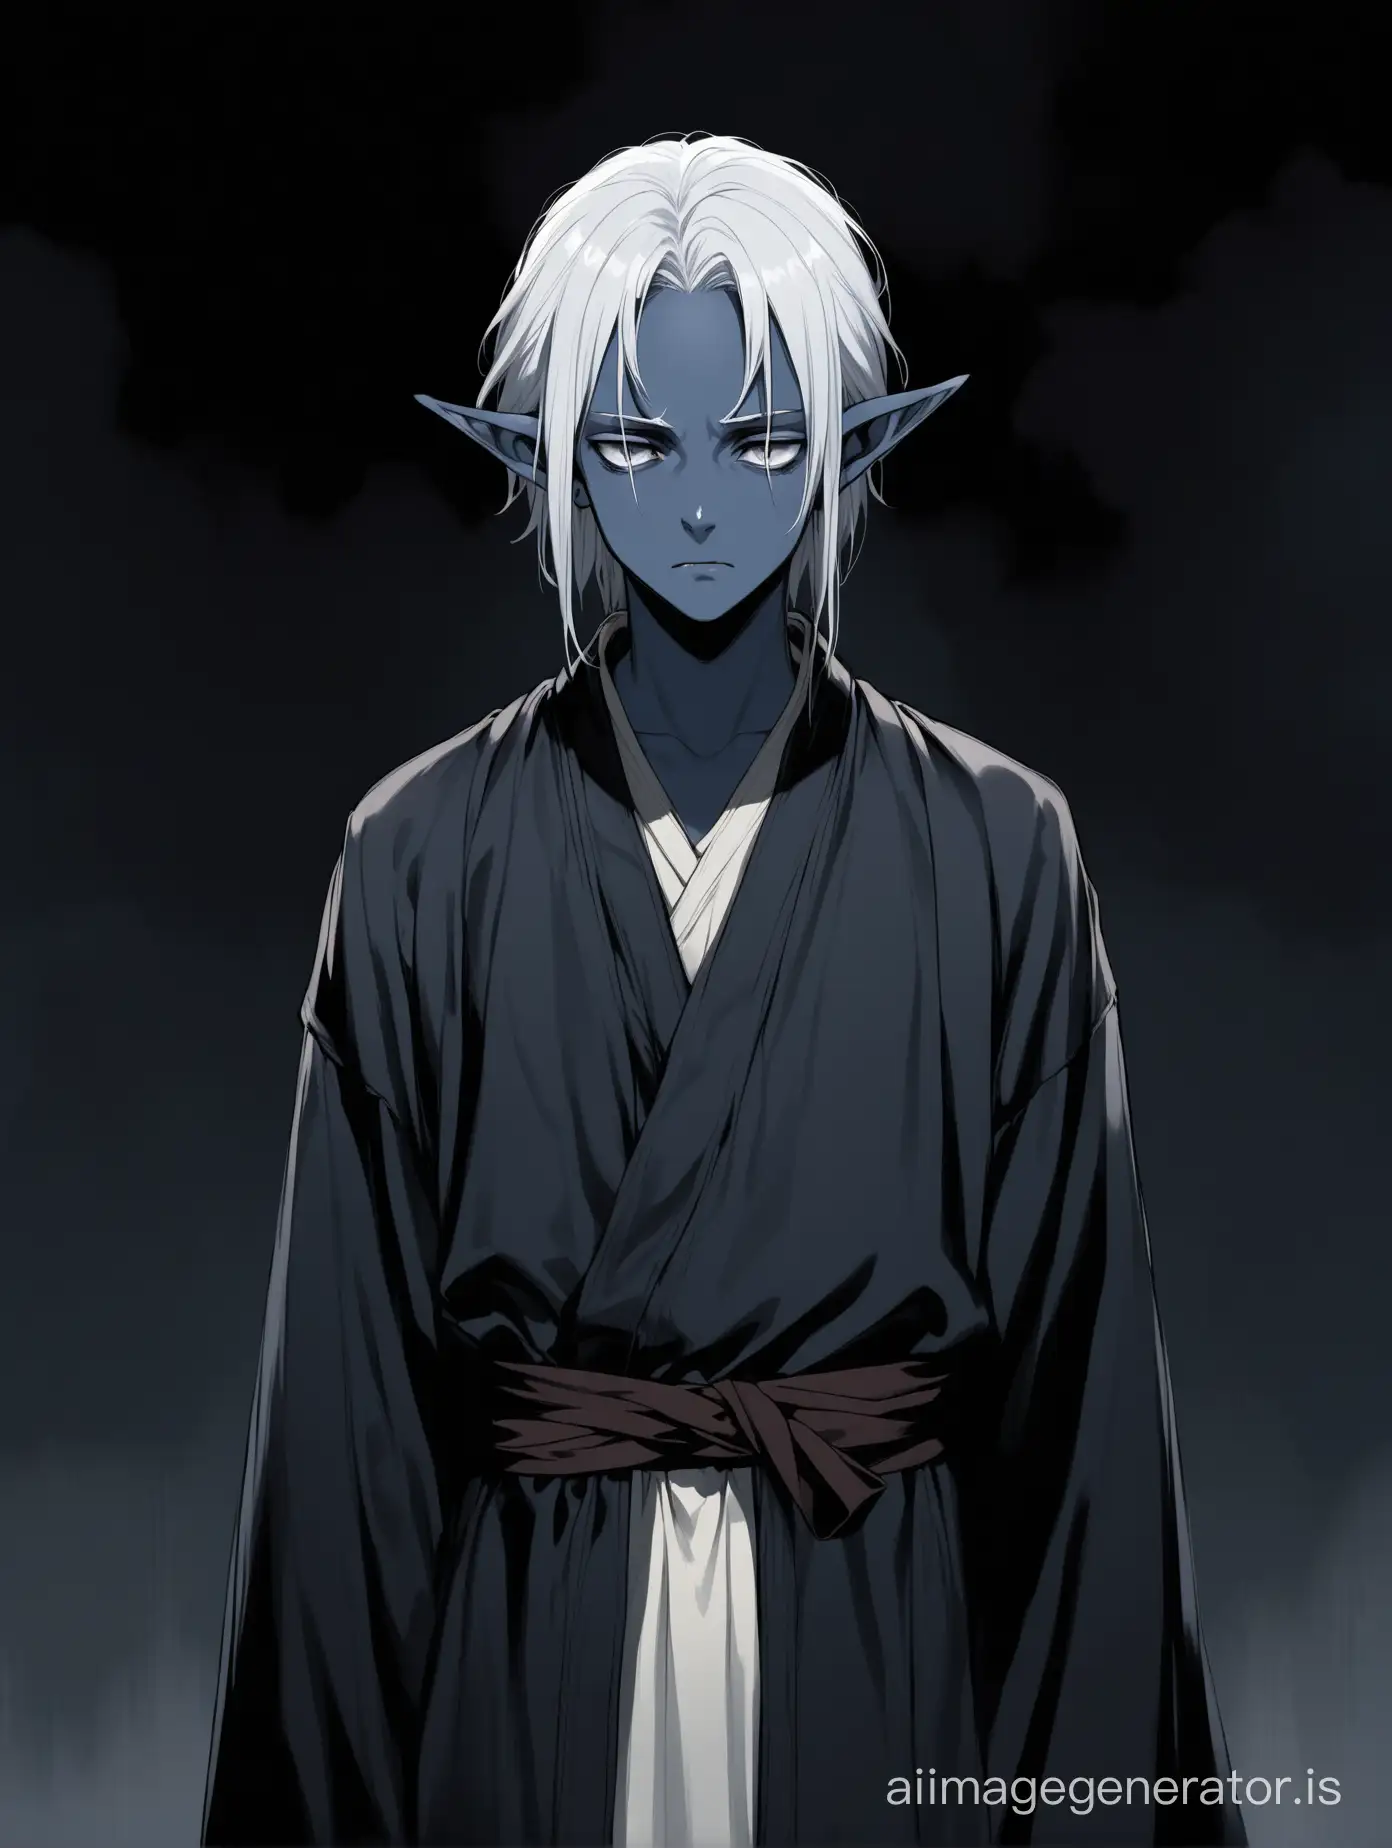 A 16-year-old boy, a dark elf with gray-blue skin, with white hair in a dark robe and a black shirt, stands in the dark with a sullen face